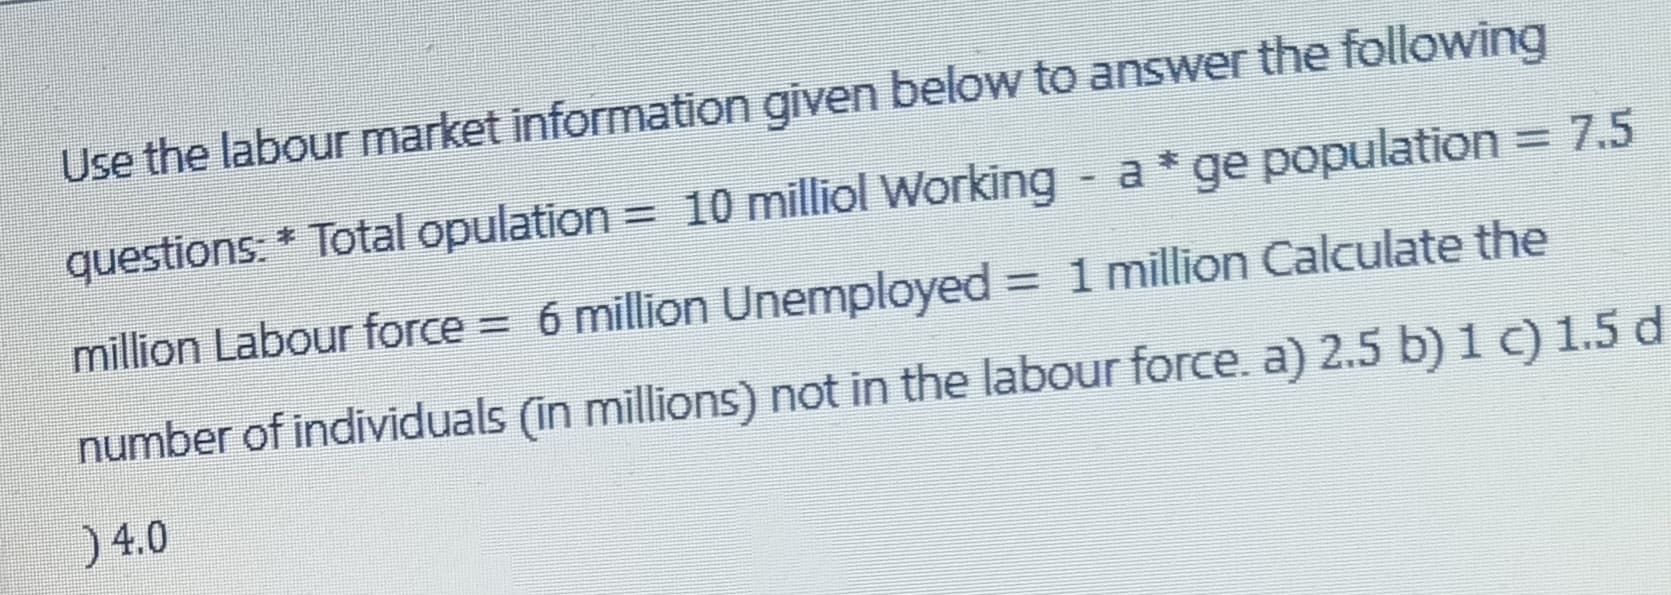 Use the labour market information given below to answer the following
questions: * Total opulation = 10 milliol Working - a * ge population = 7.5
million Labour force = 6 million Unemployed = 1 million Calculate the
number of individuals (in millions) not in the labour force. a) 2.5 b) 1 c) 1.5 d
) 4.0